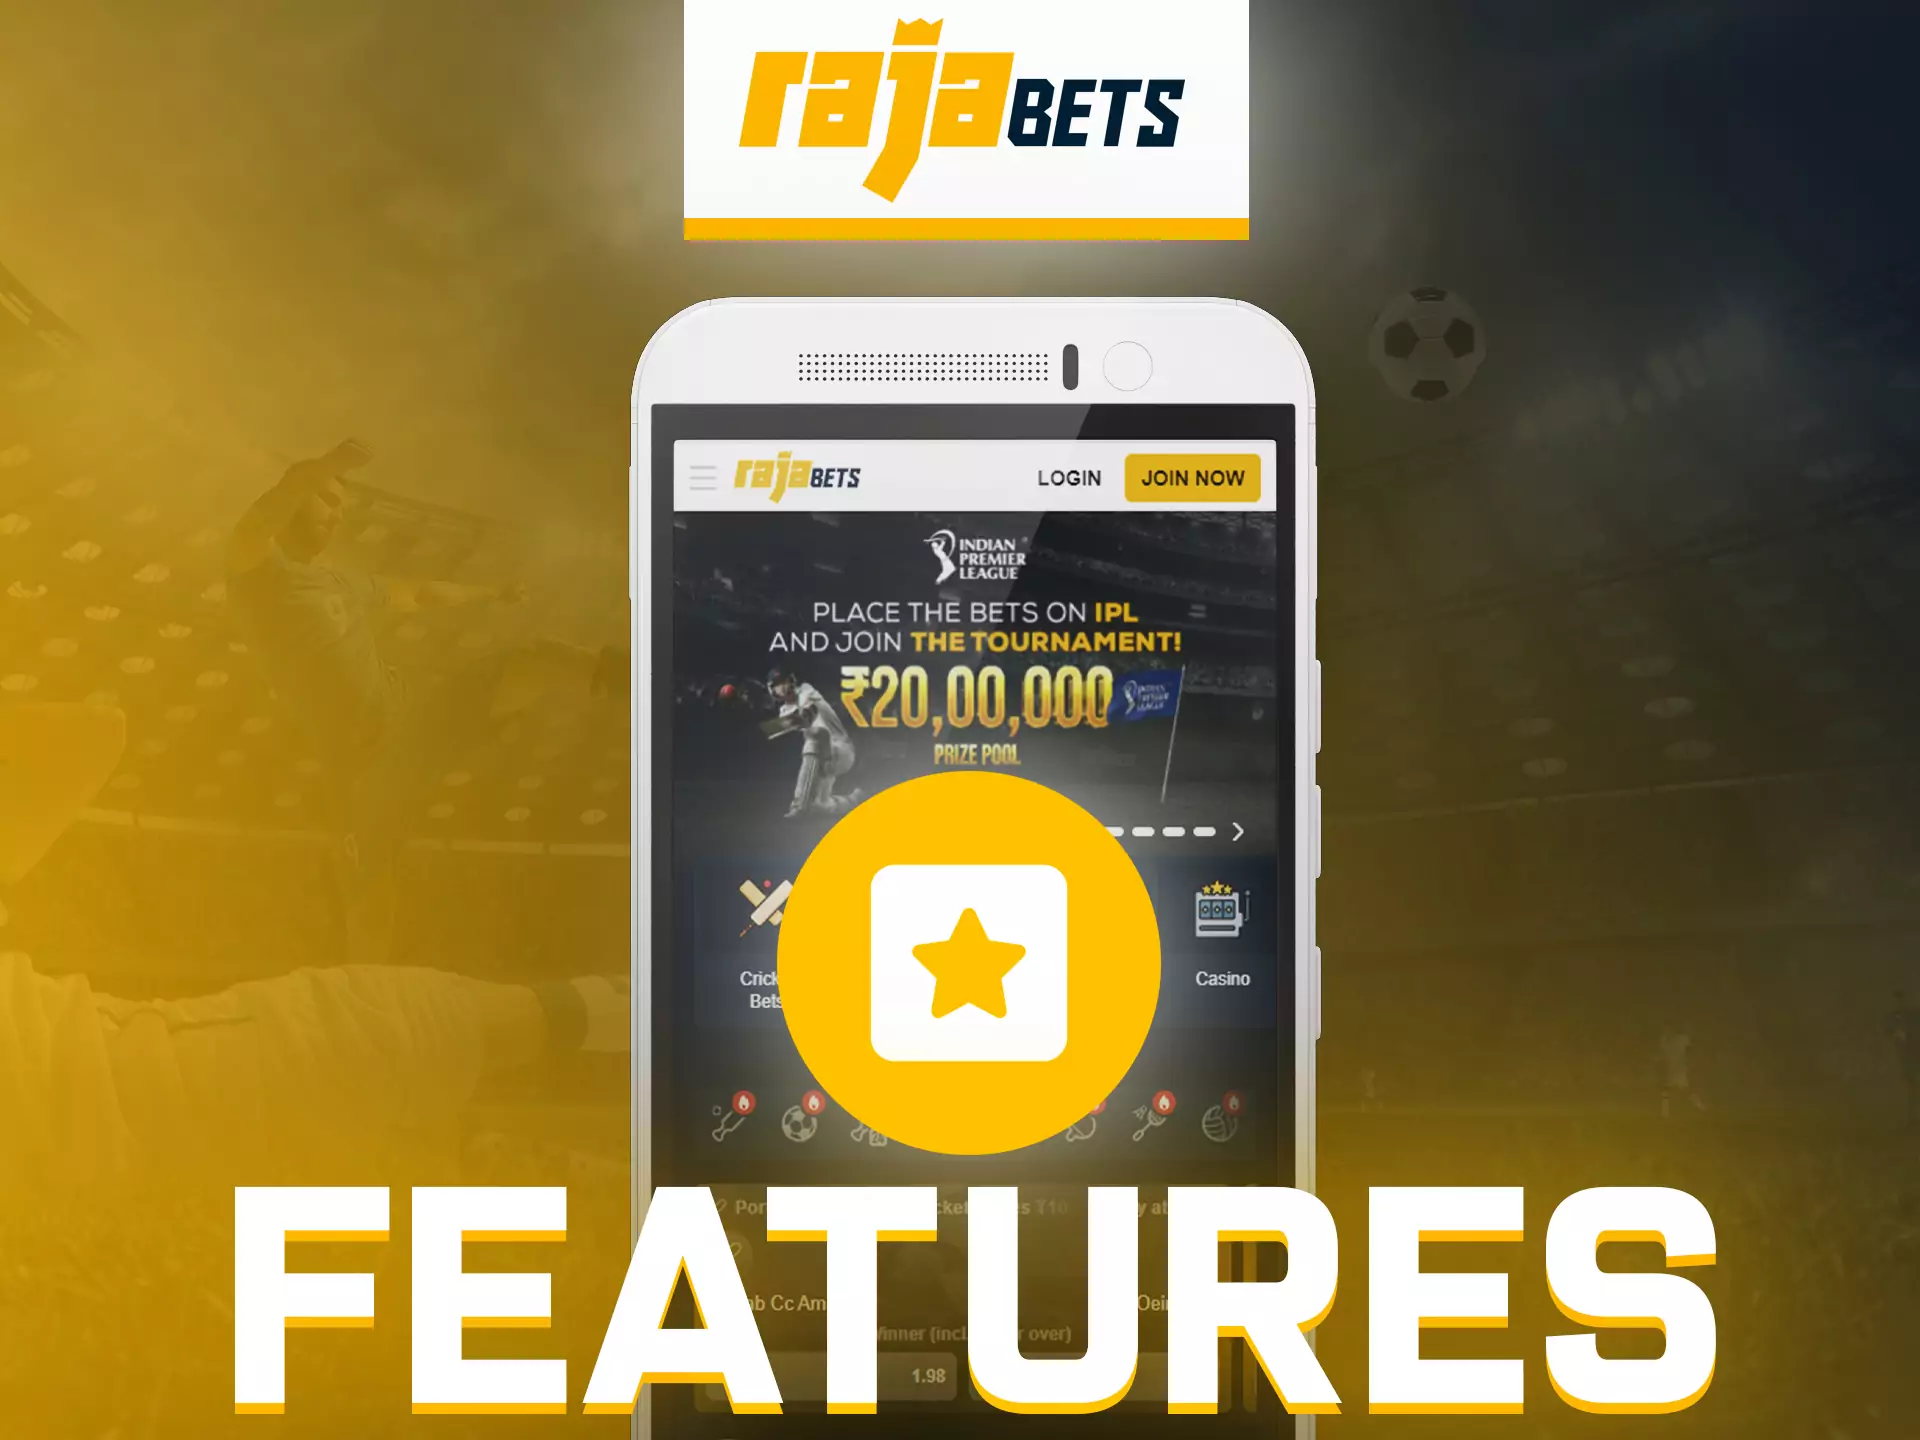 Rajabets app has user-friendly and useful features.